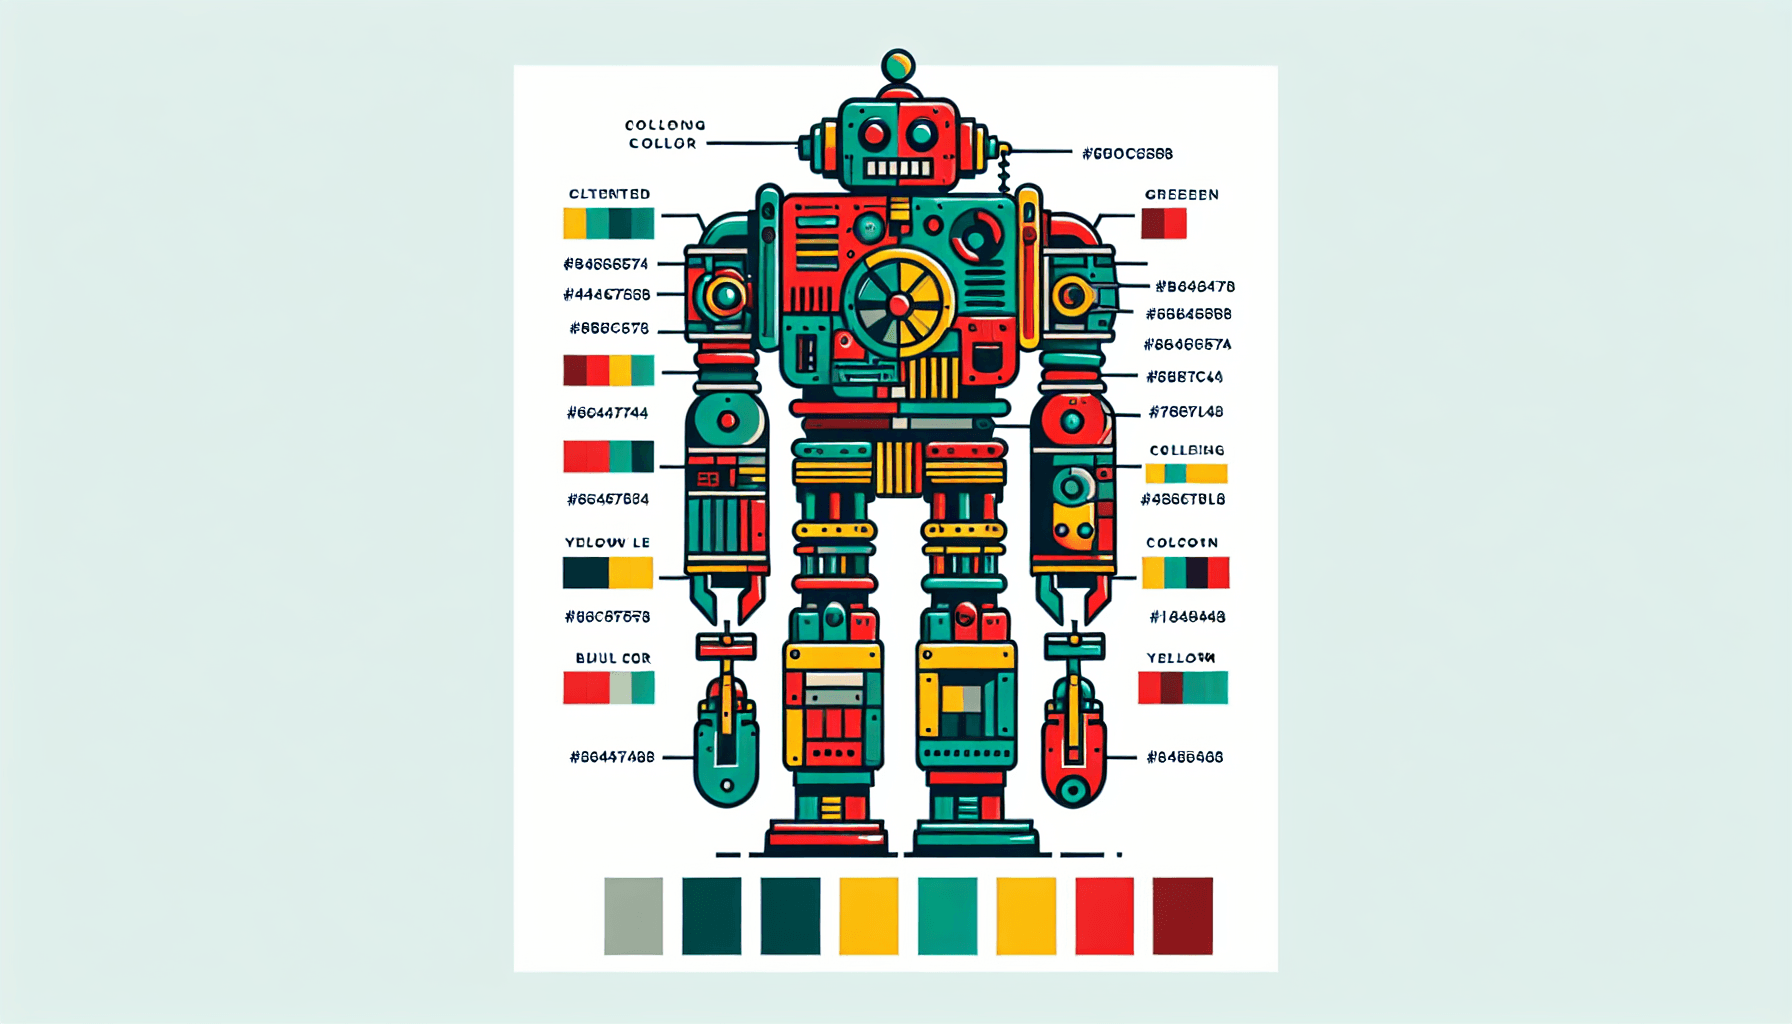 Robot in flat illustration style and white background, red #f47574, green #88c7a8, yellow #fcc44b, and blue #645bc8 colors.